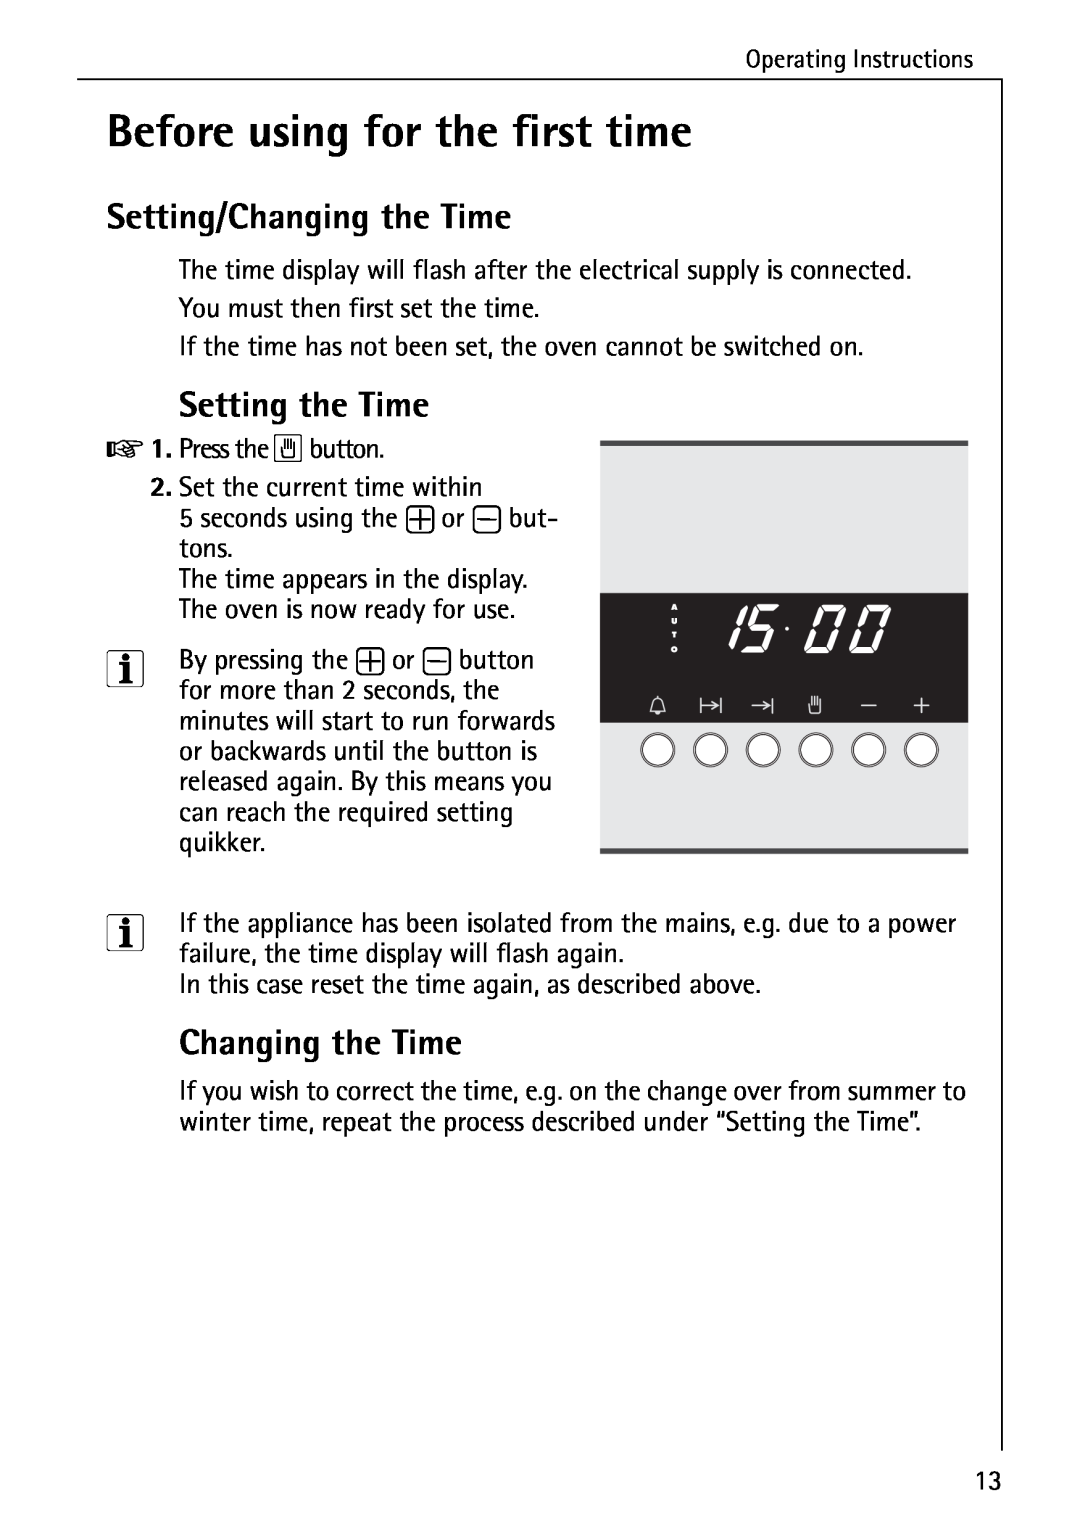 AEG B 4100 operating instructions Before using for the first time, Setting/Changing the Time, Setting the Time 